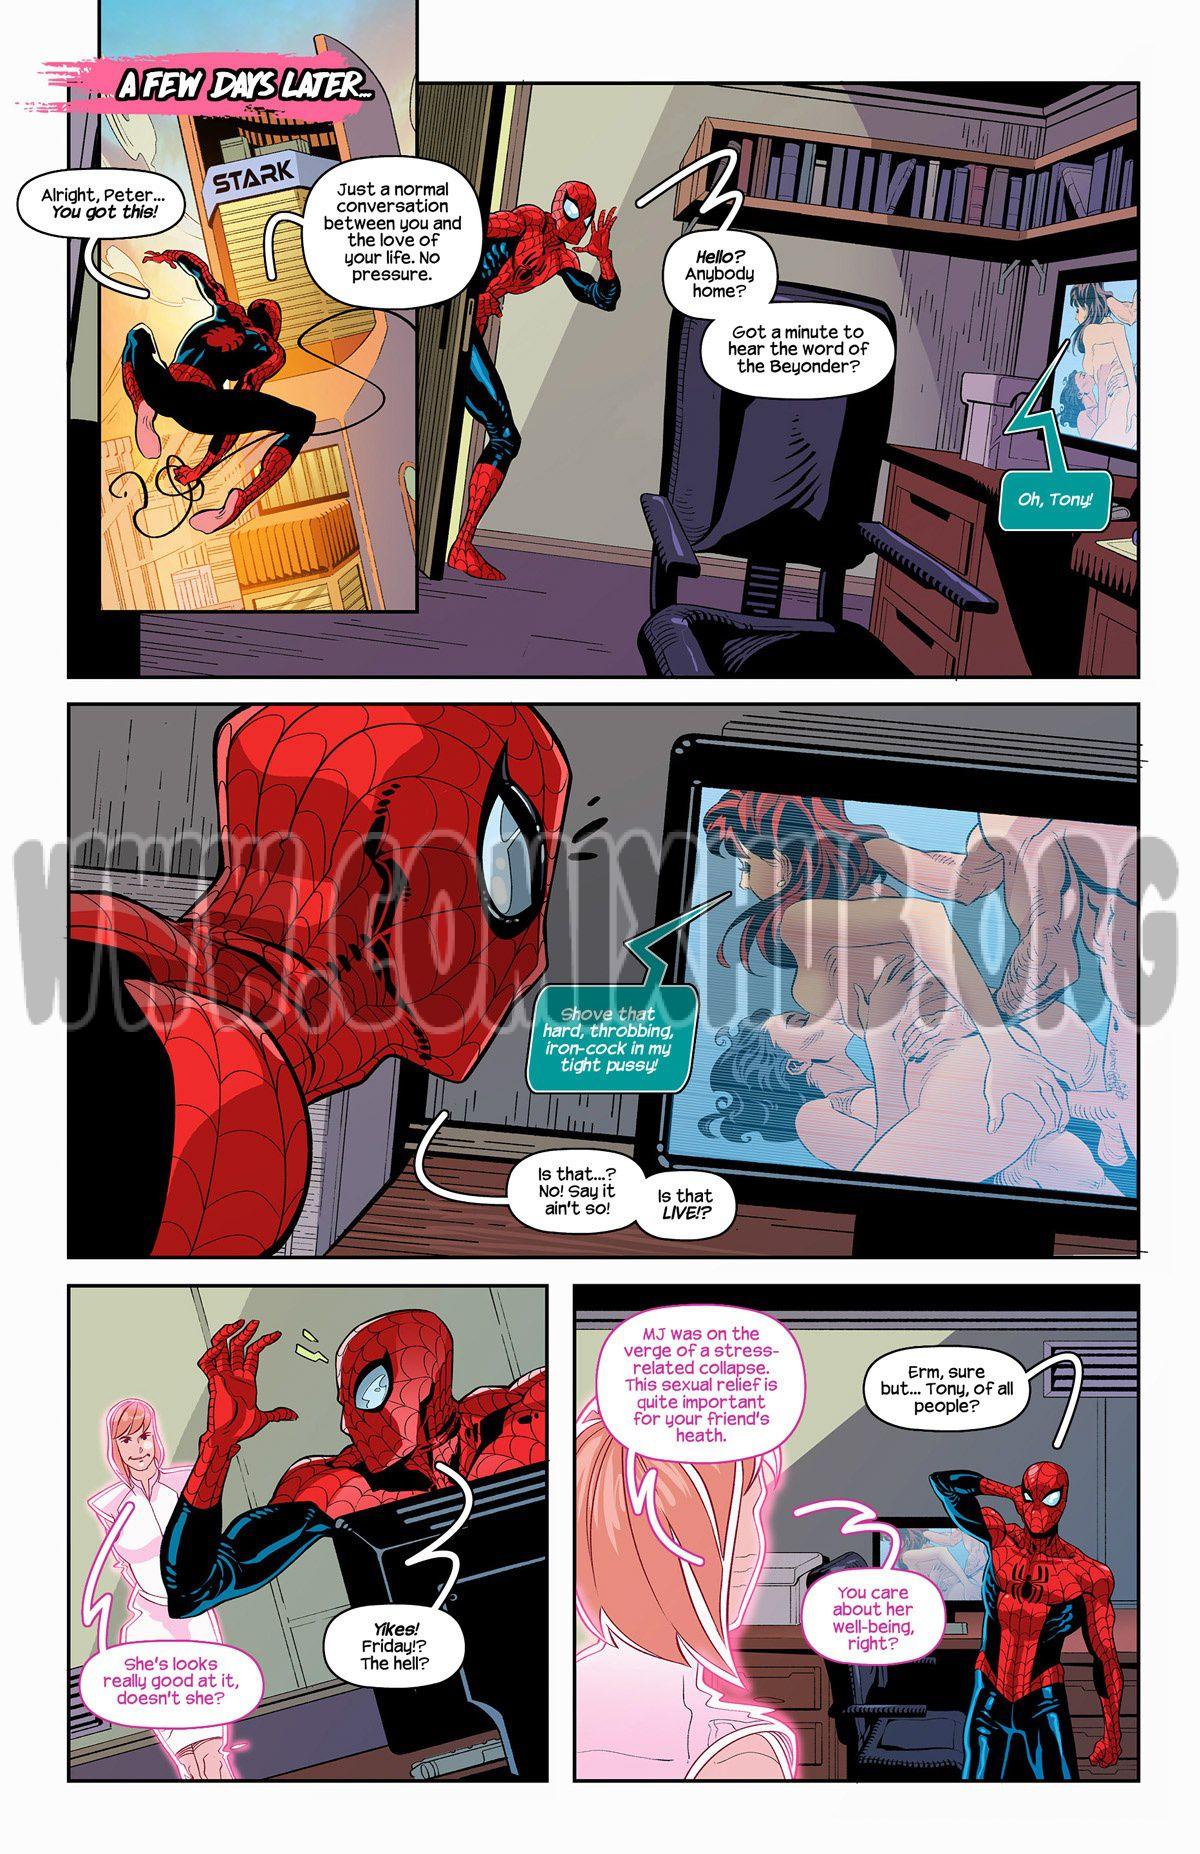 Invincible Iron Spider porn comics Oral sex, Anal Sex, Blowjob, cunnilingus, Double Penetration, Group Sex, Straight